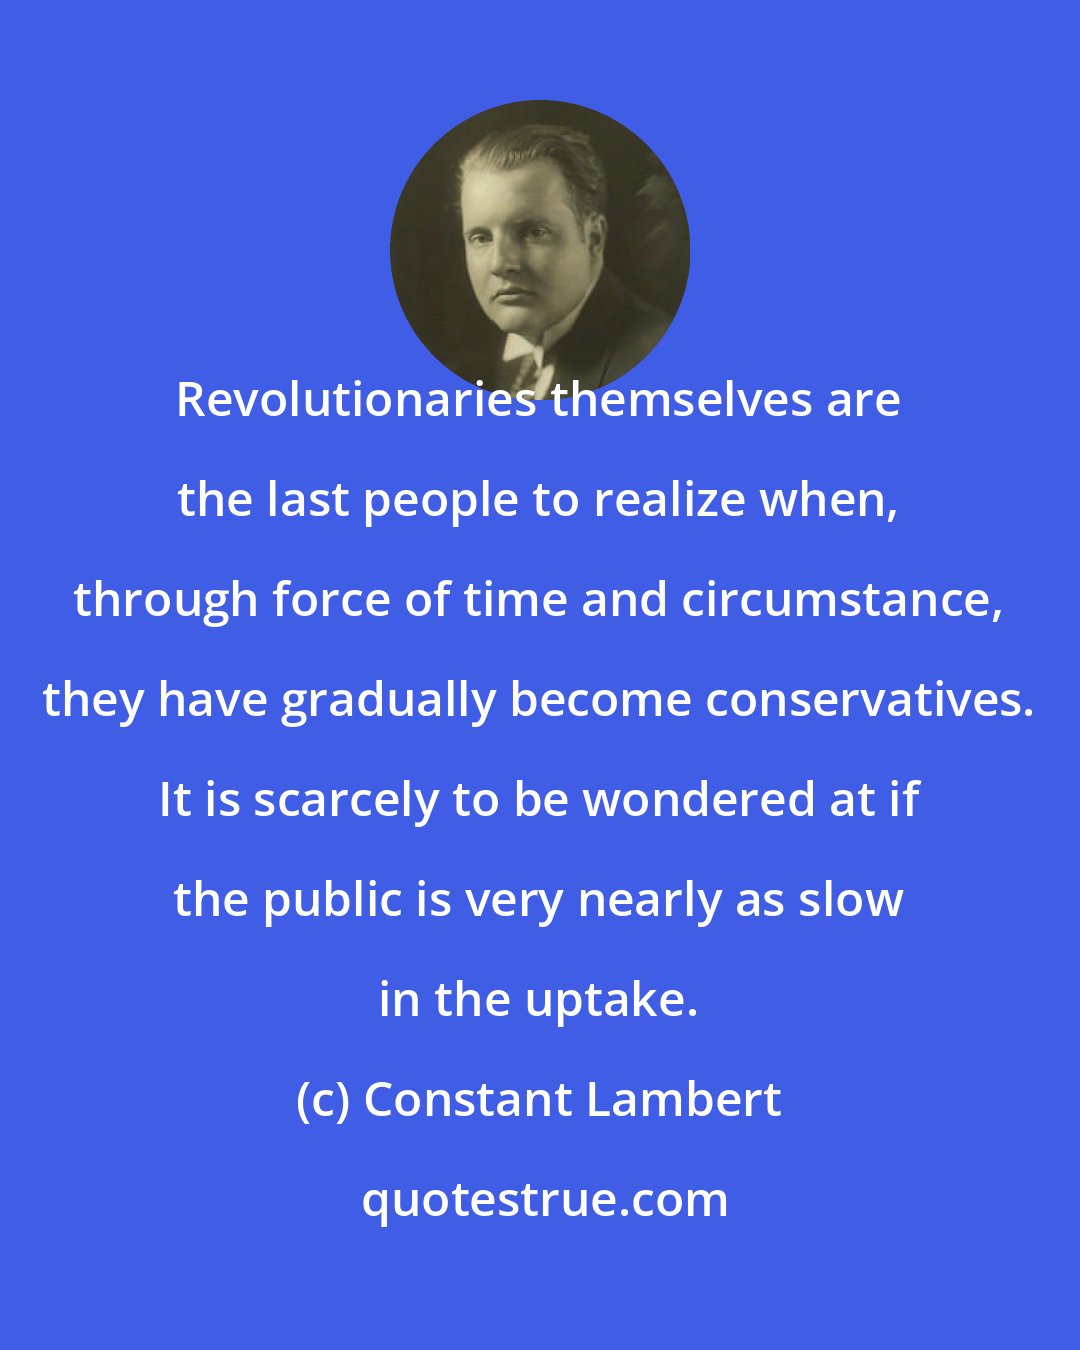 Constant Lambert: Revolutionaries themselves are the last people to realize when, through force of time and circumstance, they have gradually become conservatives. It is scarcely to be wondered at if the public is very nearly as slow in the uptake.